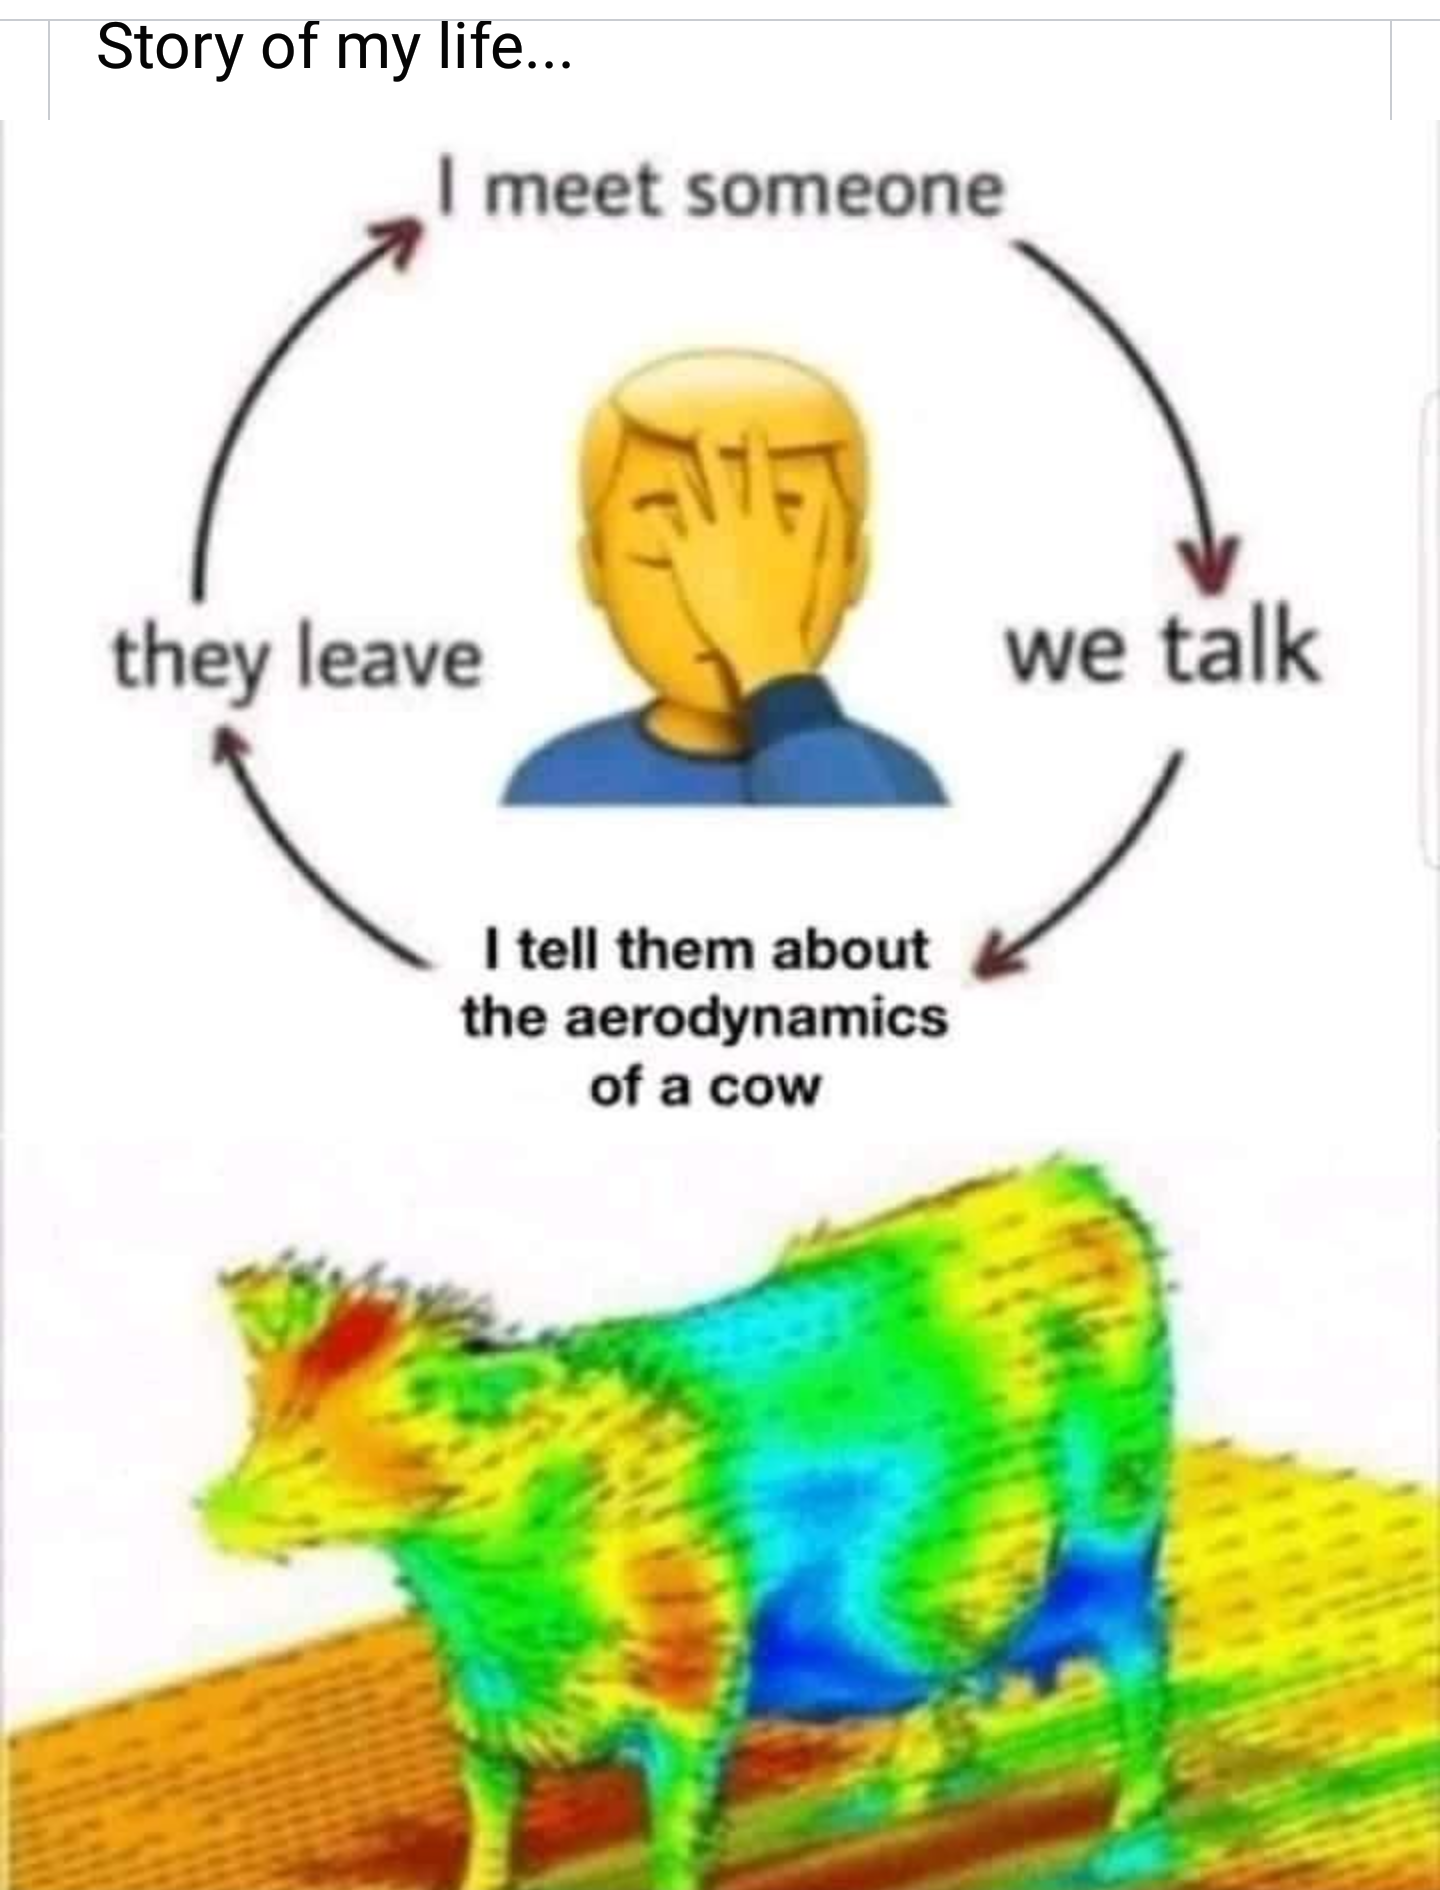 aerodynamics of a cow - Story of my life... I meet someone they leave we talk I tell them about the aerodynamics of a cow